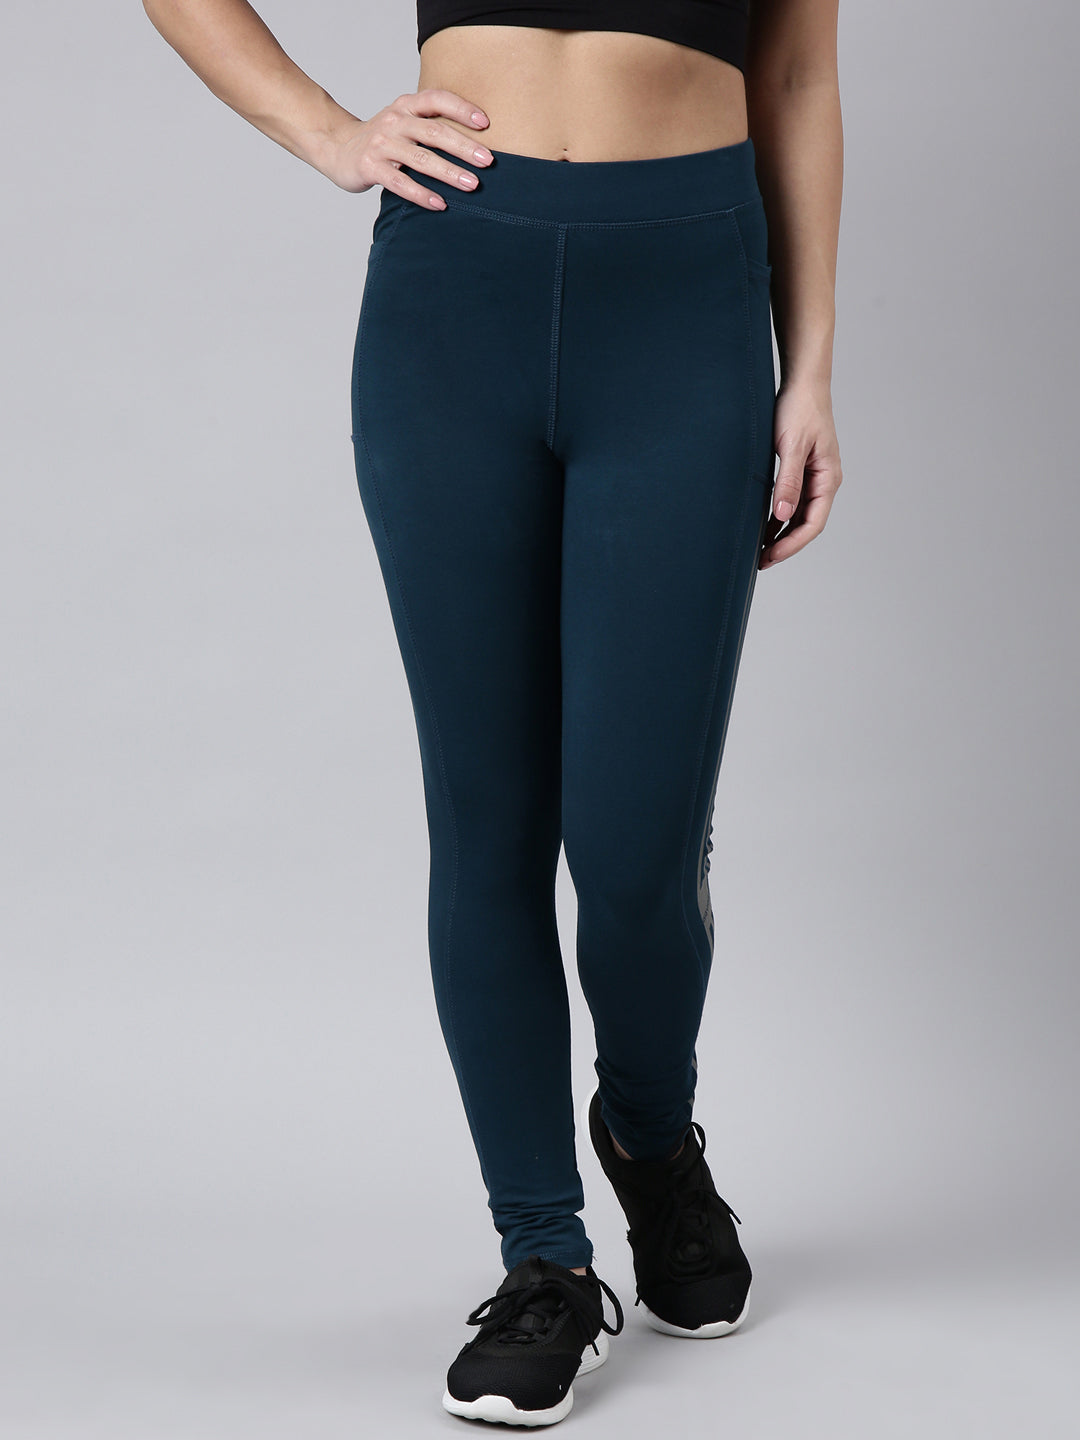 Women Solid Slim Fit Teal Track Pant